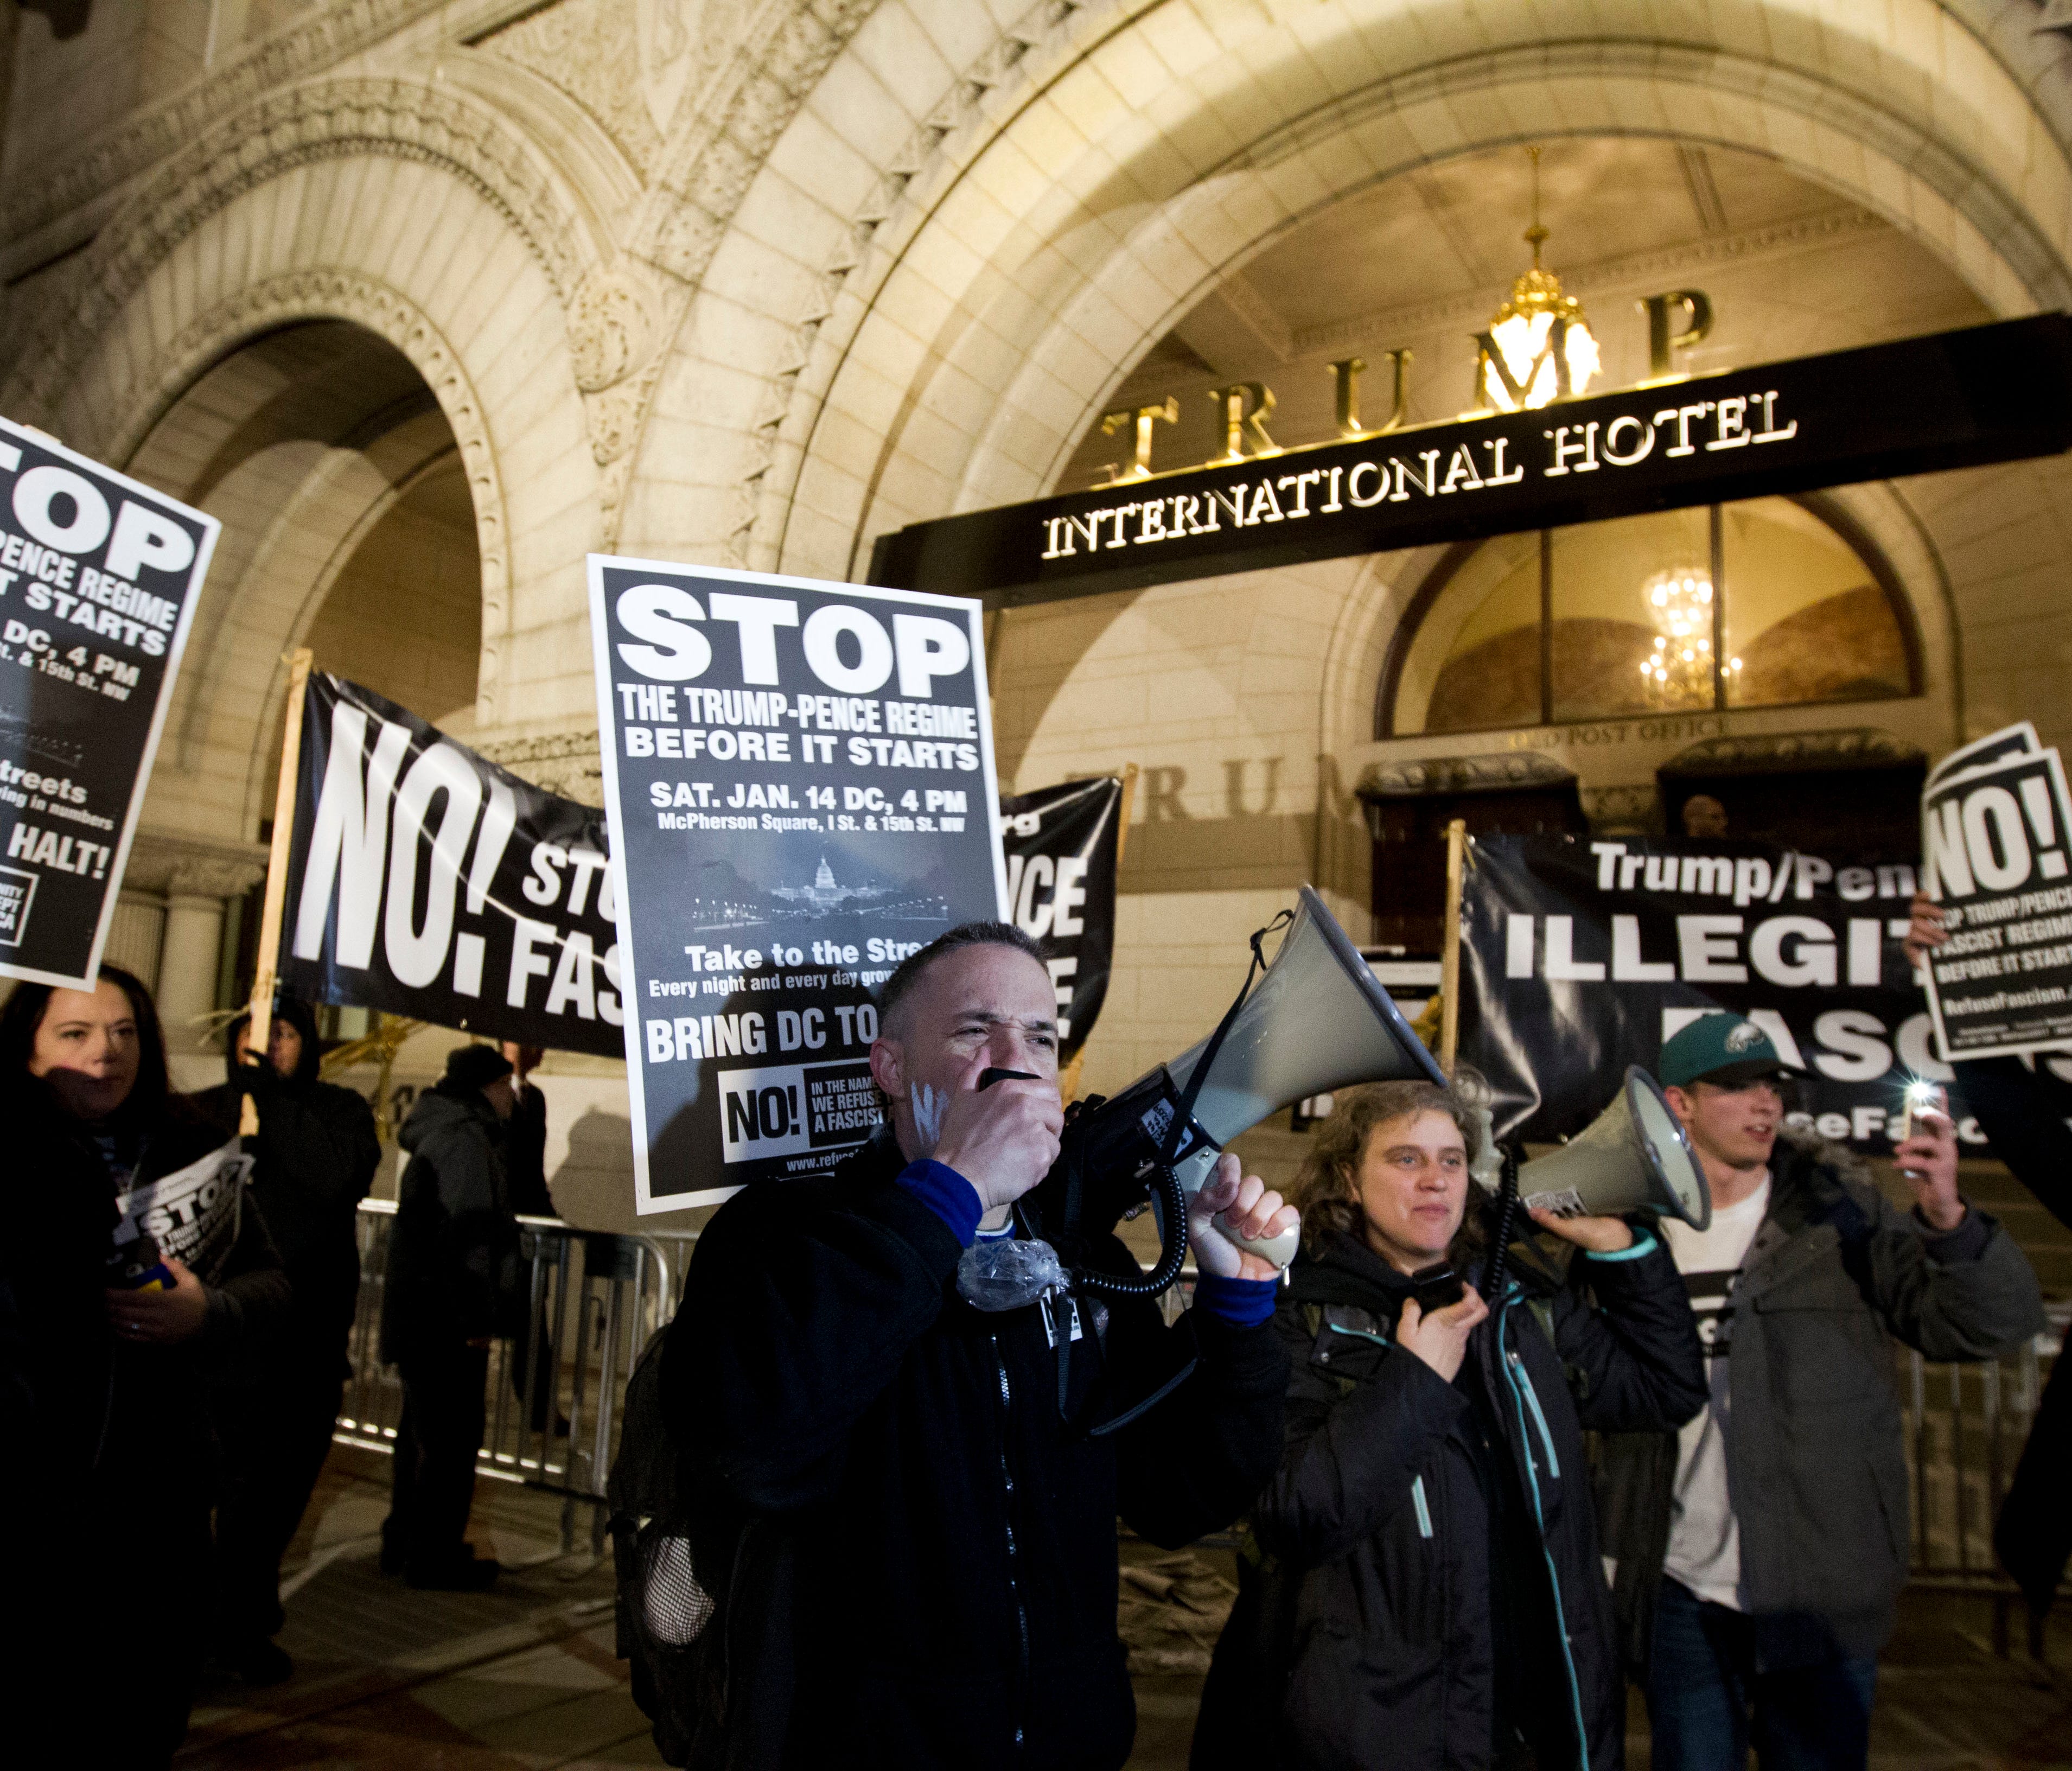 Demonstrators protest outside of the Trump International Hotel during a march in downtown Washington in opposition of President-elect Donald Trump on Jan. 15, 2017.